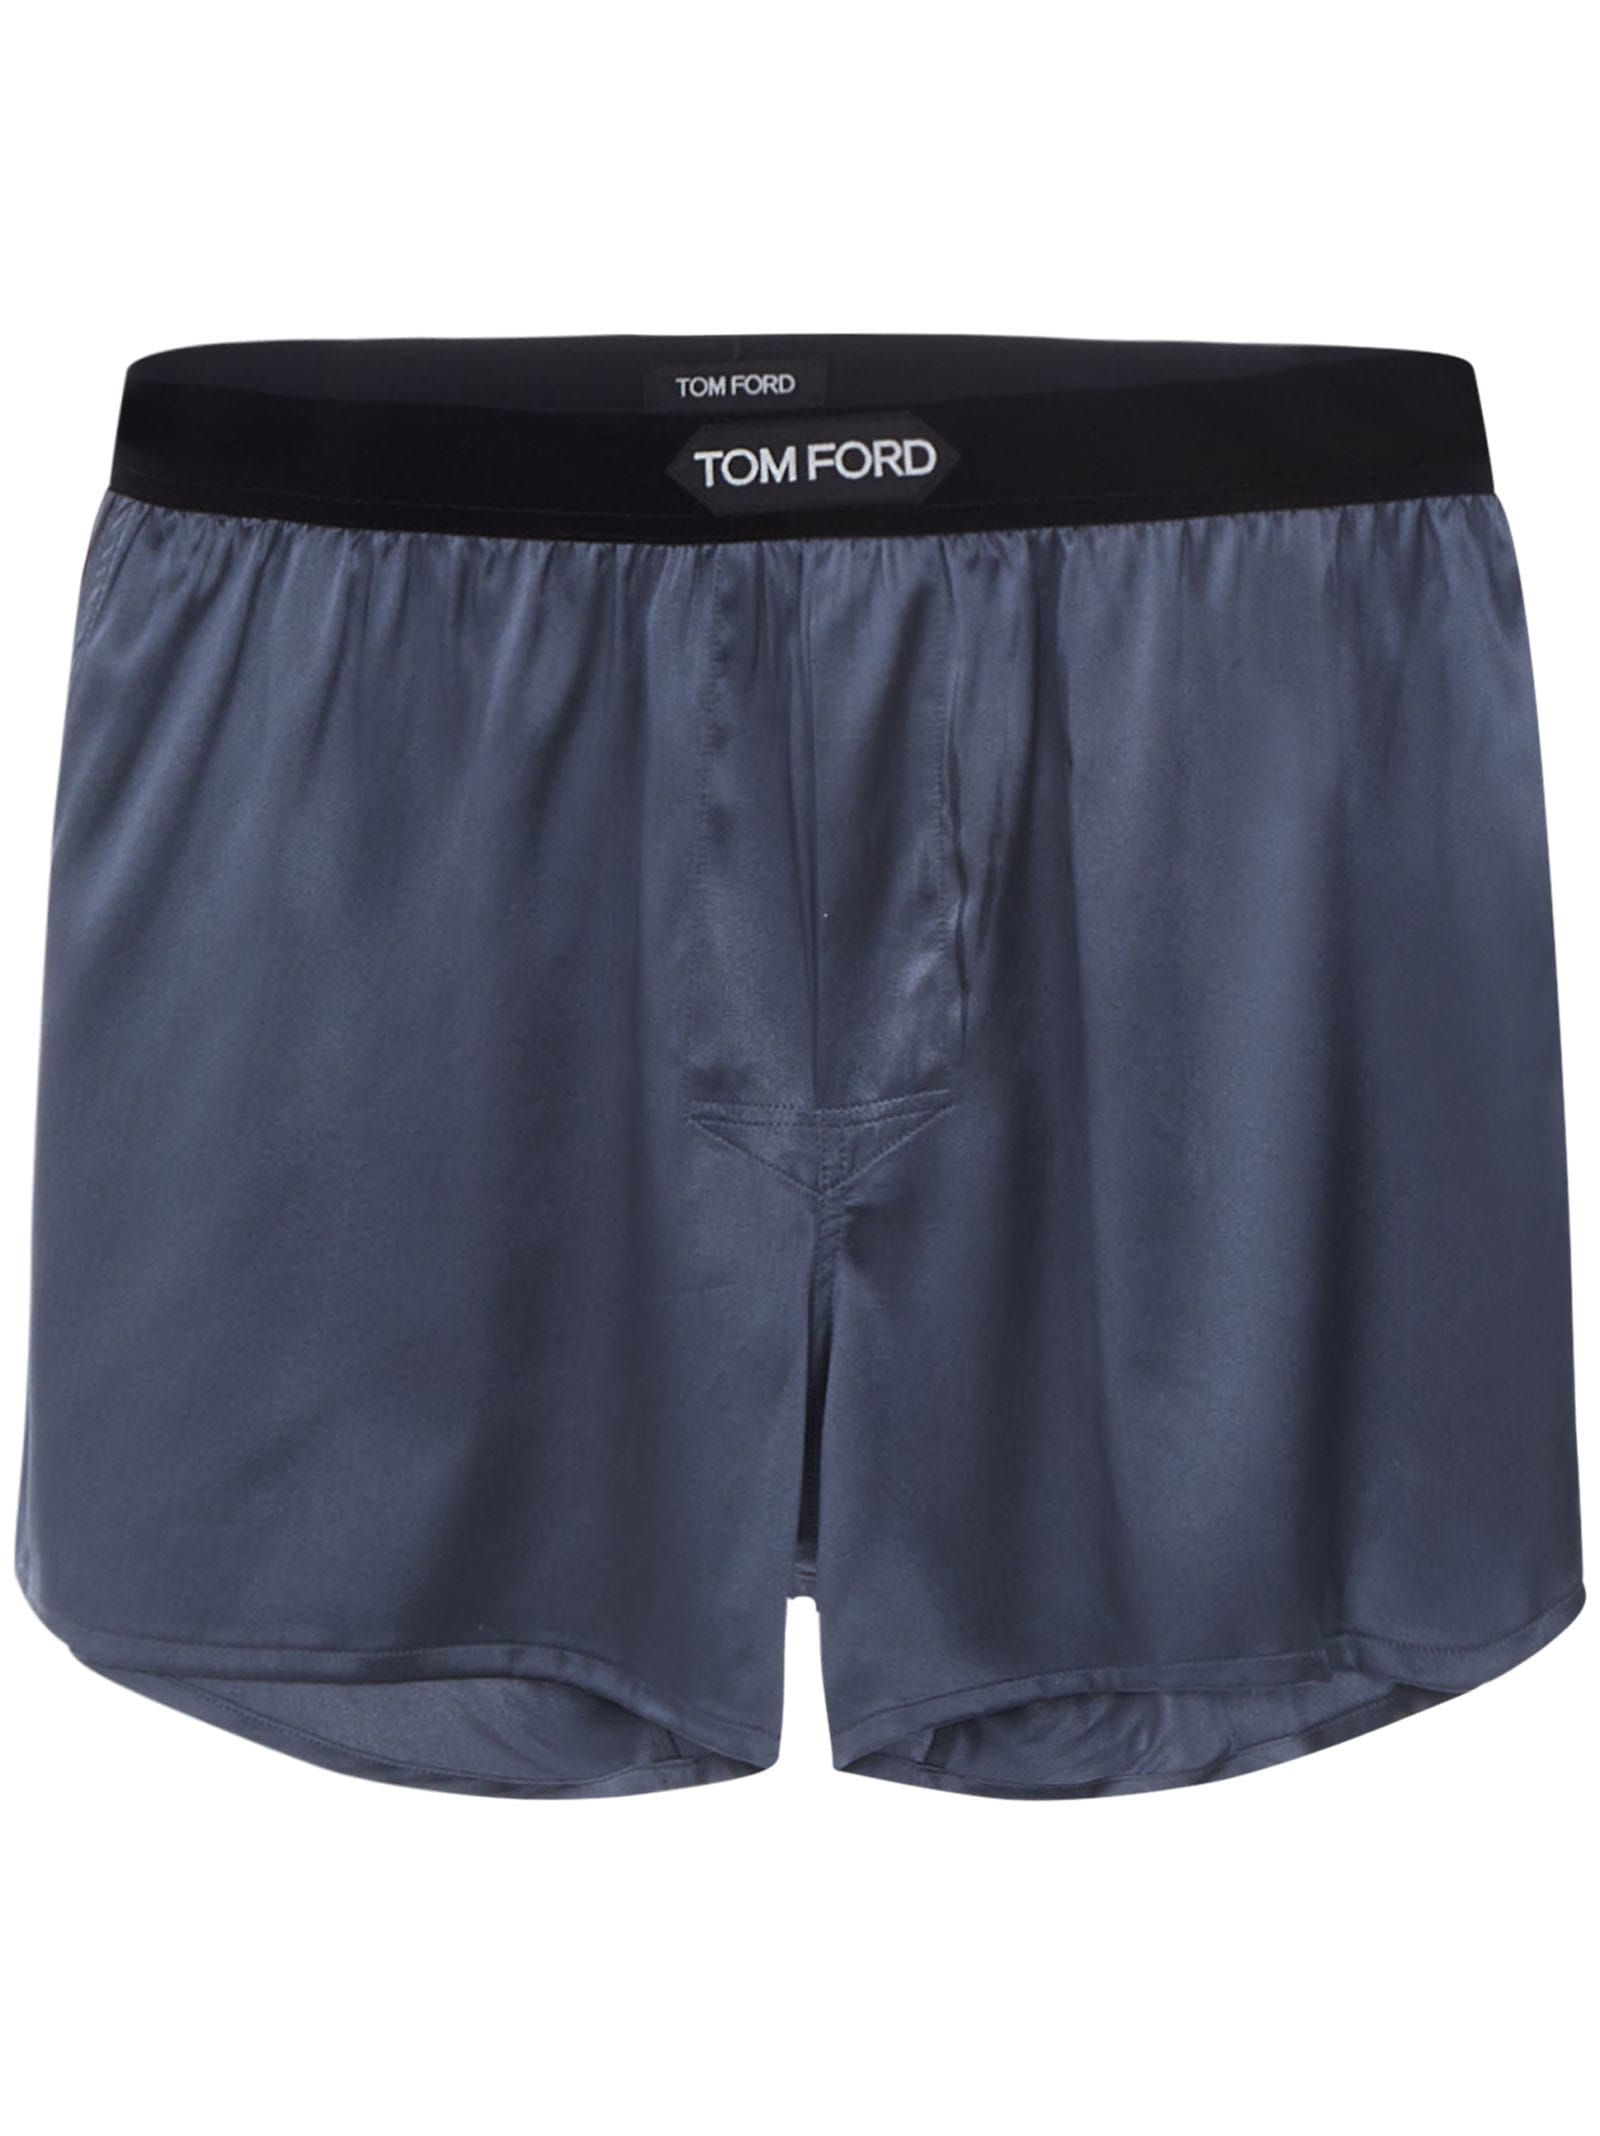 Tom Ford Boxers In Grey